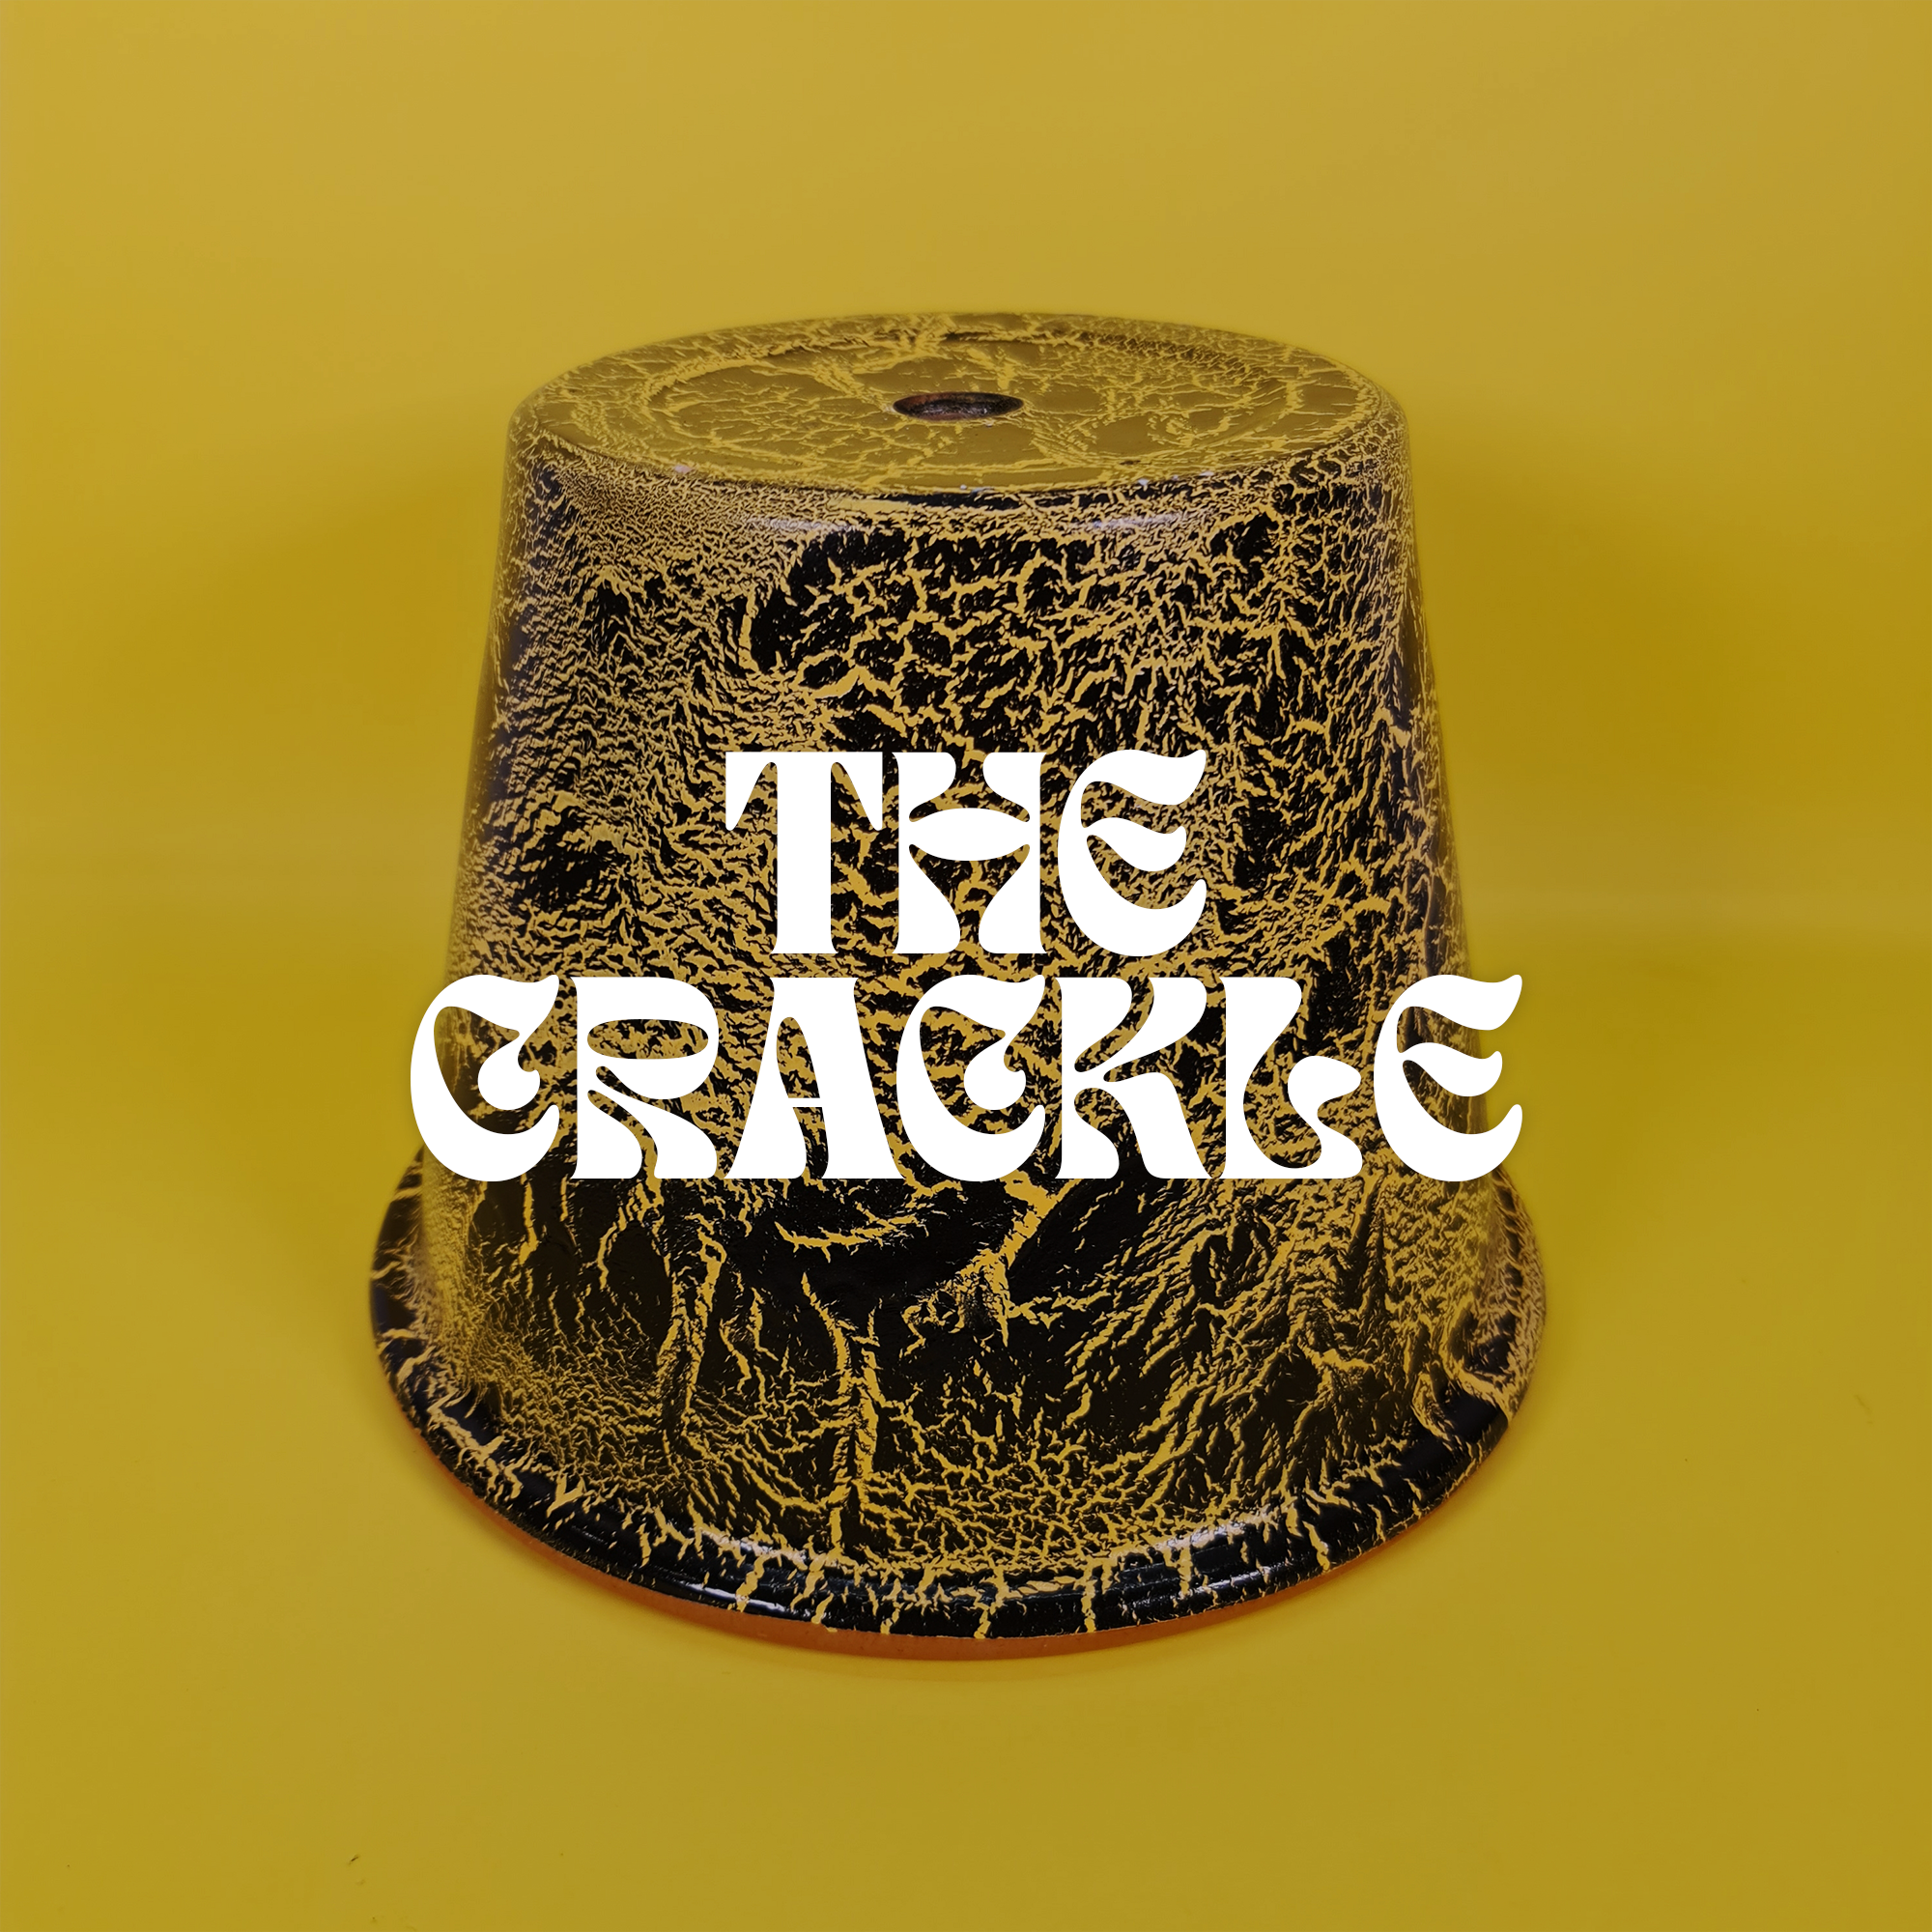 The Crackle